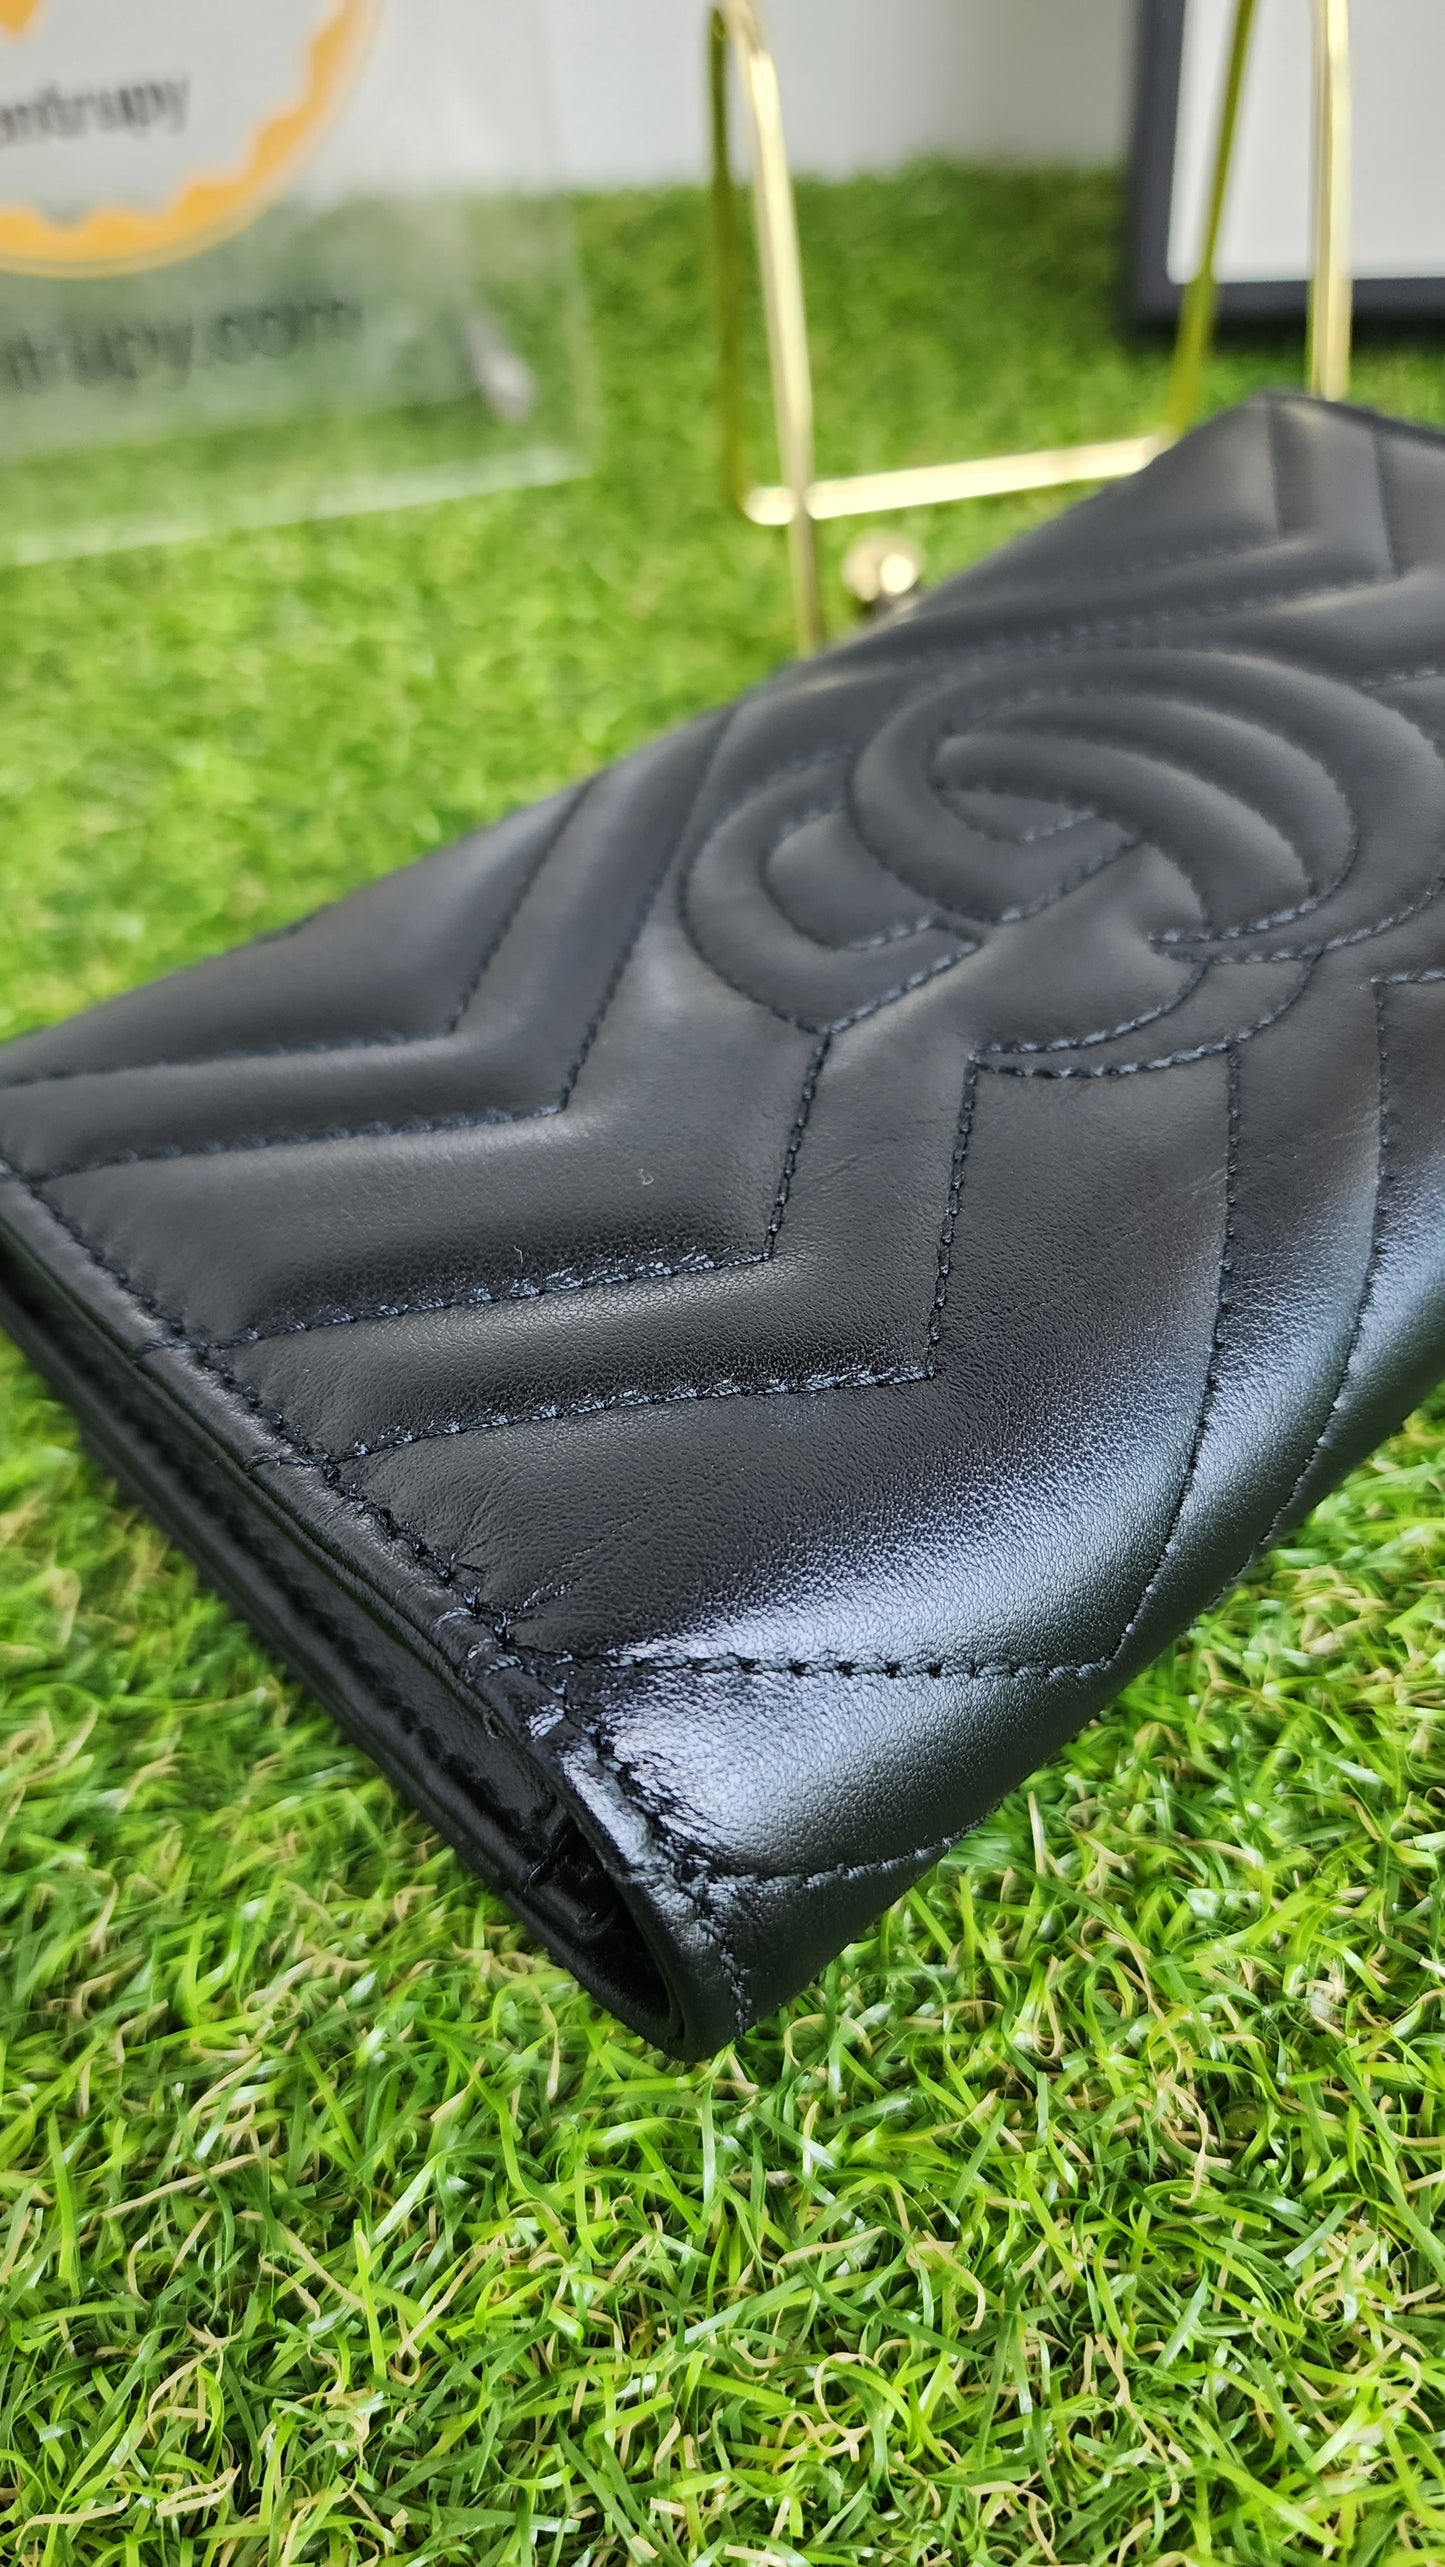 GUCCI MARMONT LONG WALLET